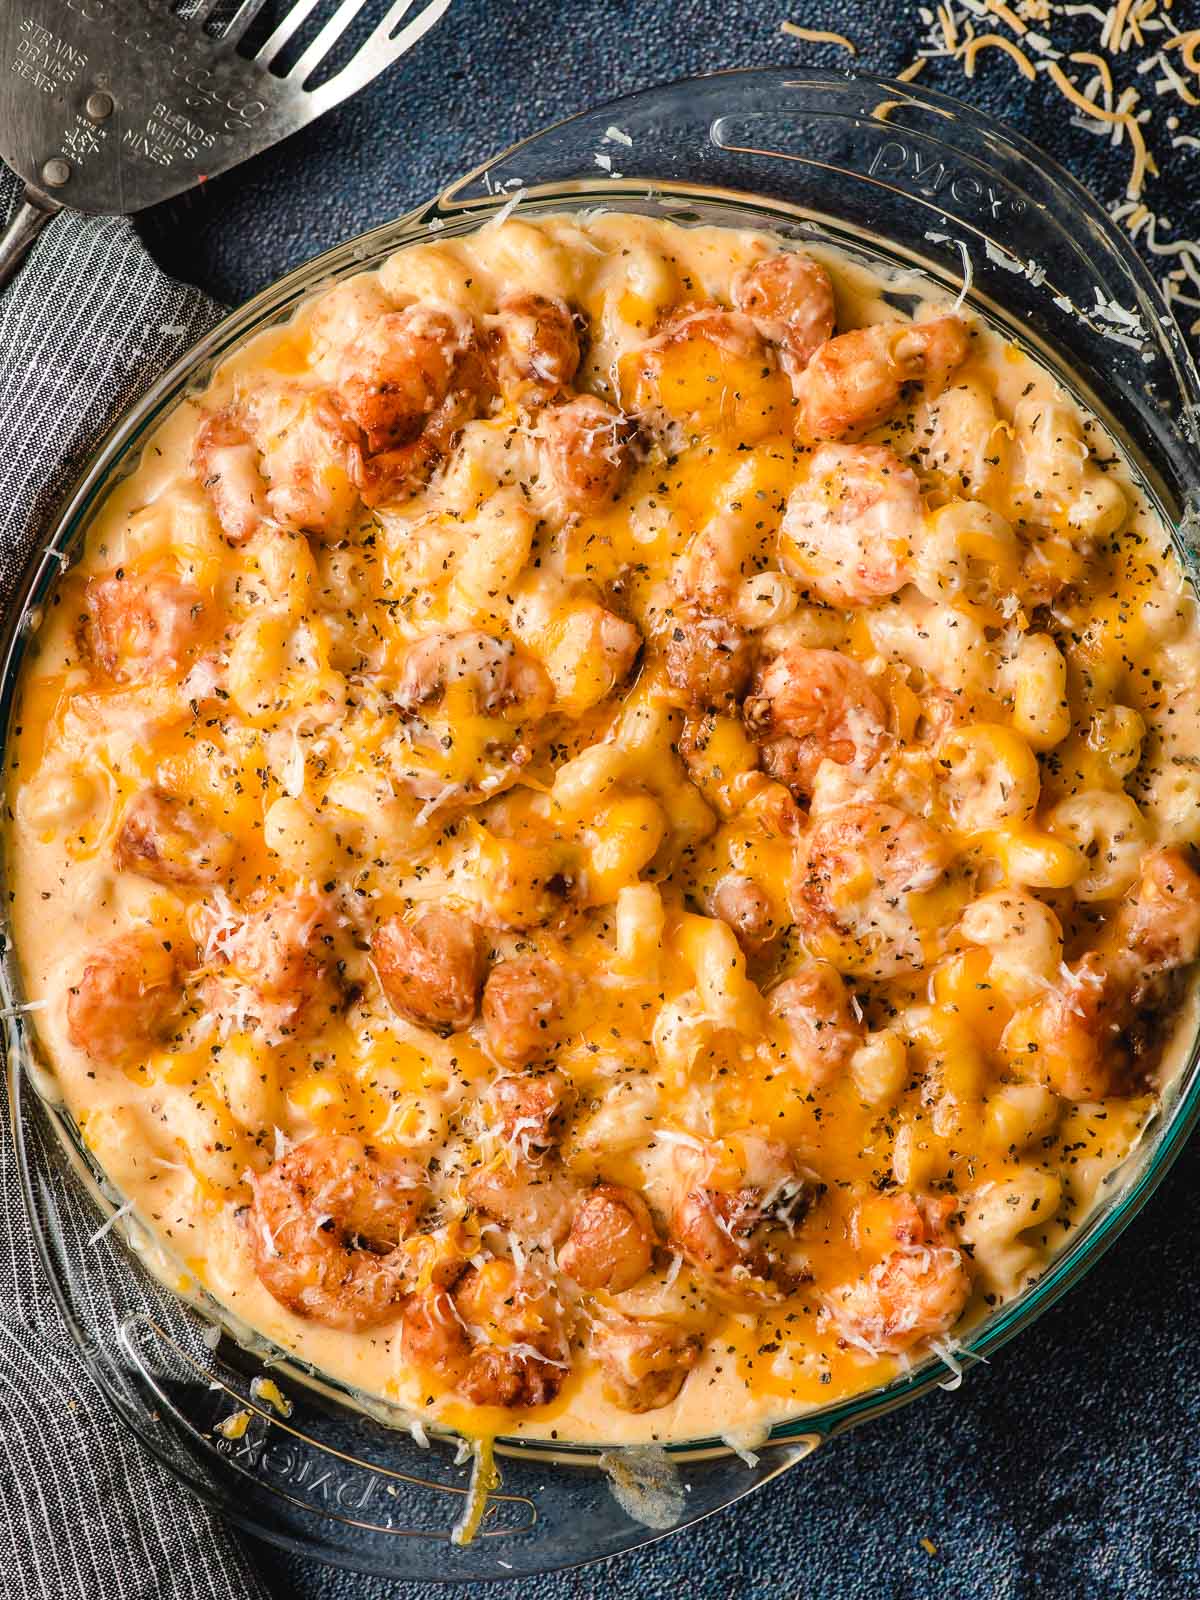 Baked Shrimp Mac and Cheese in a glass casserole dish on top of a dark colored table.